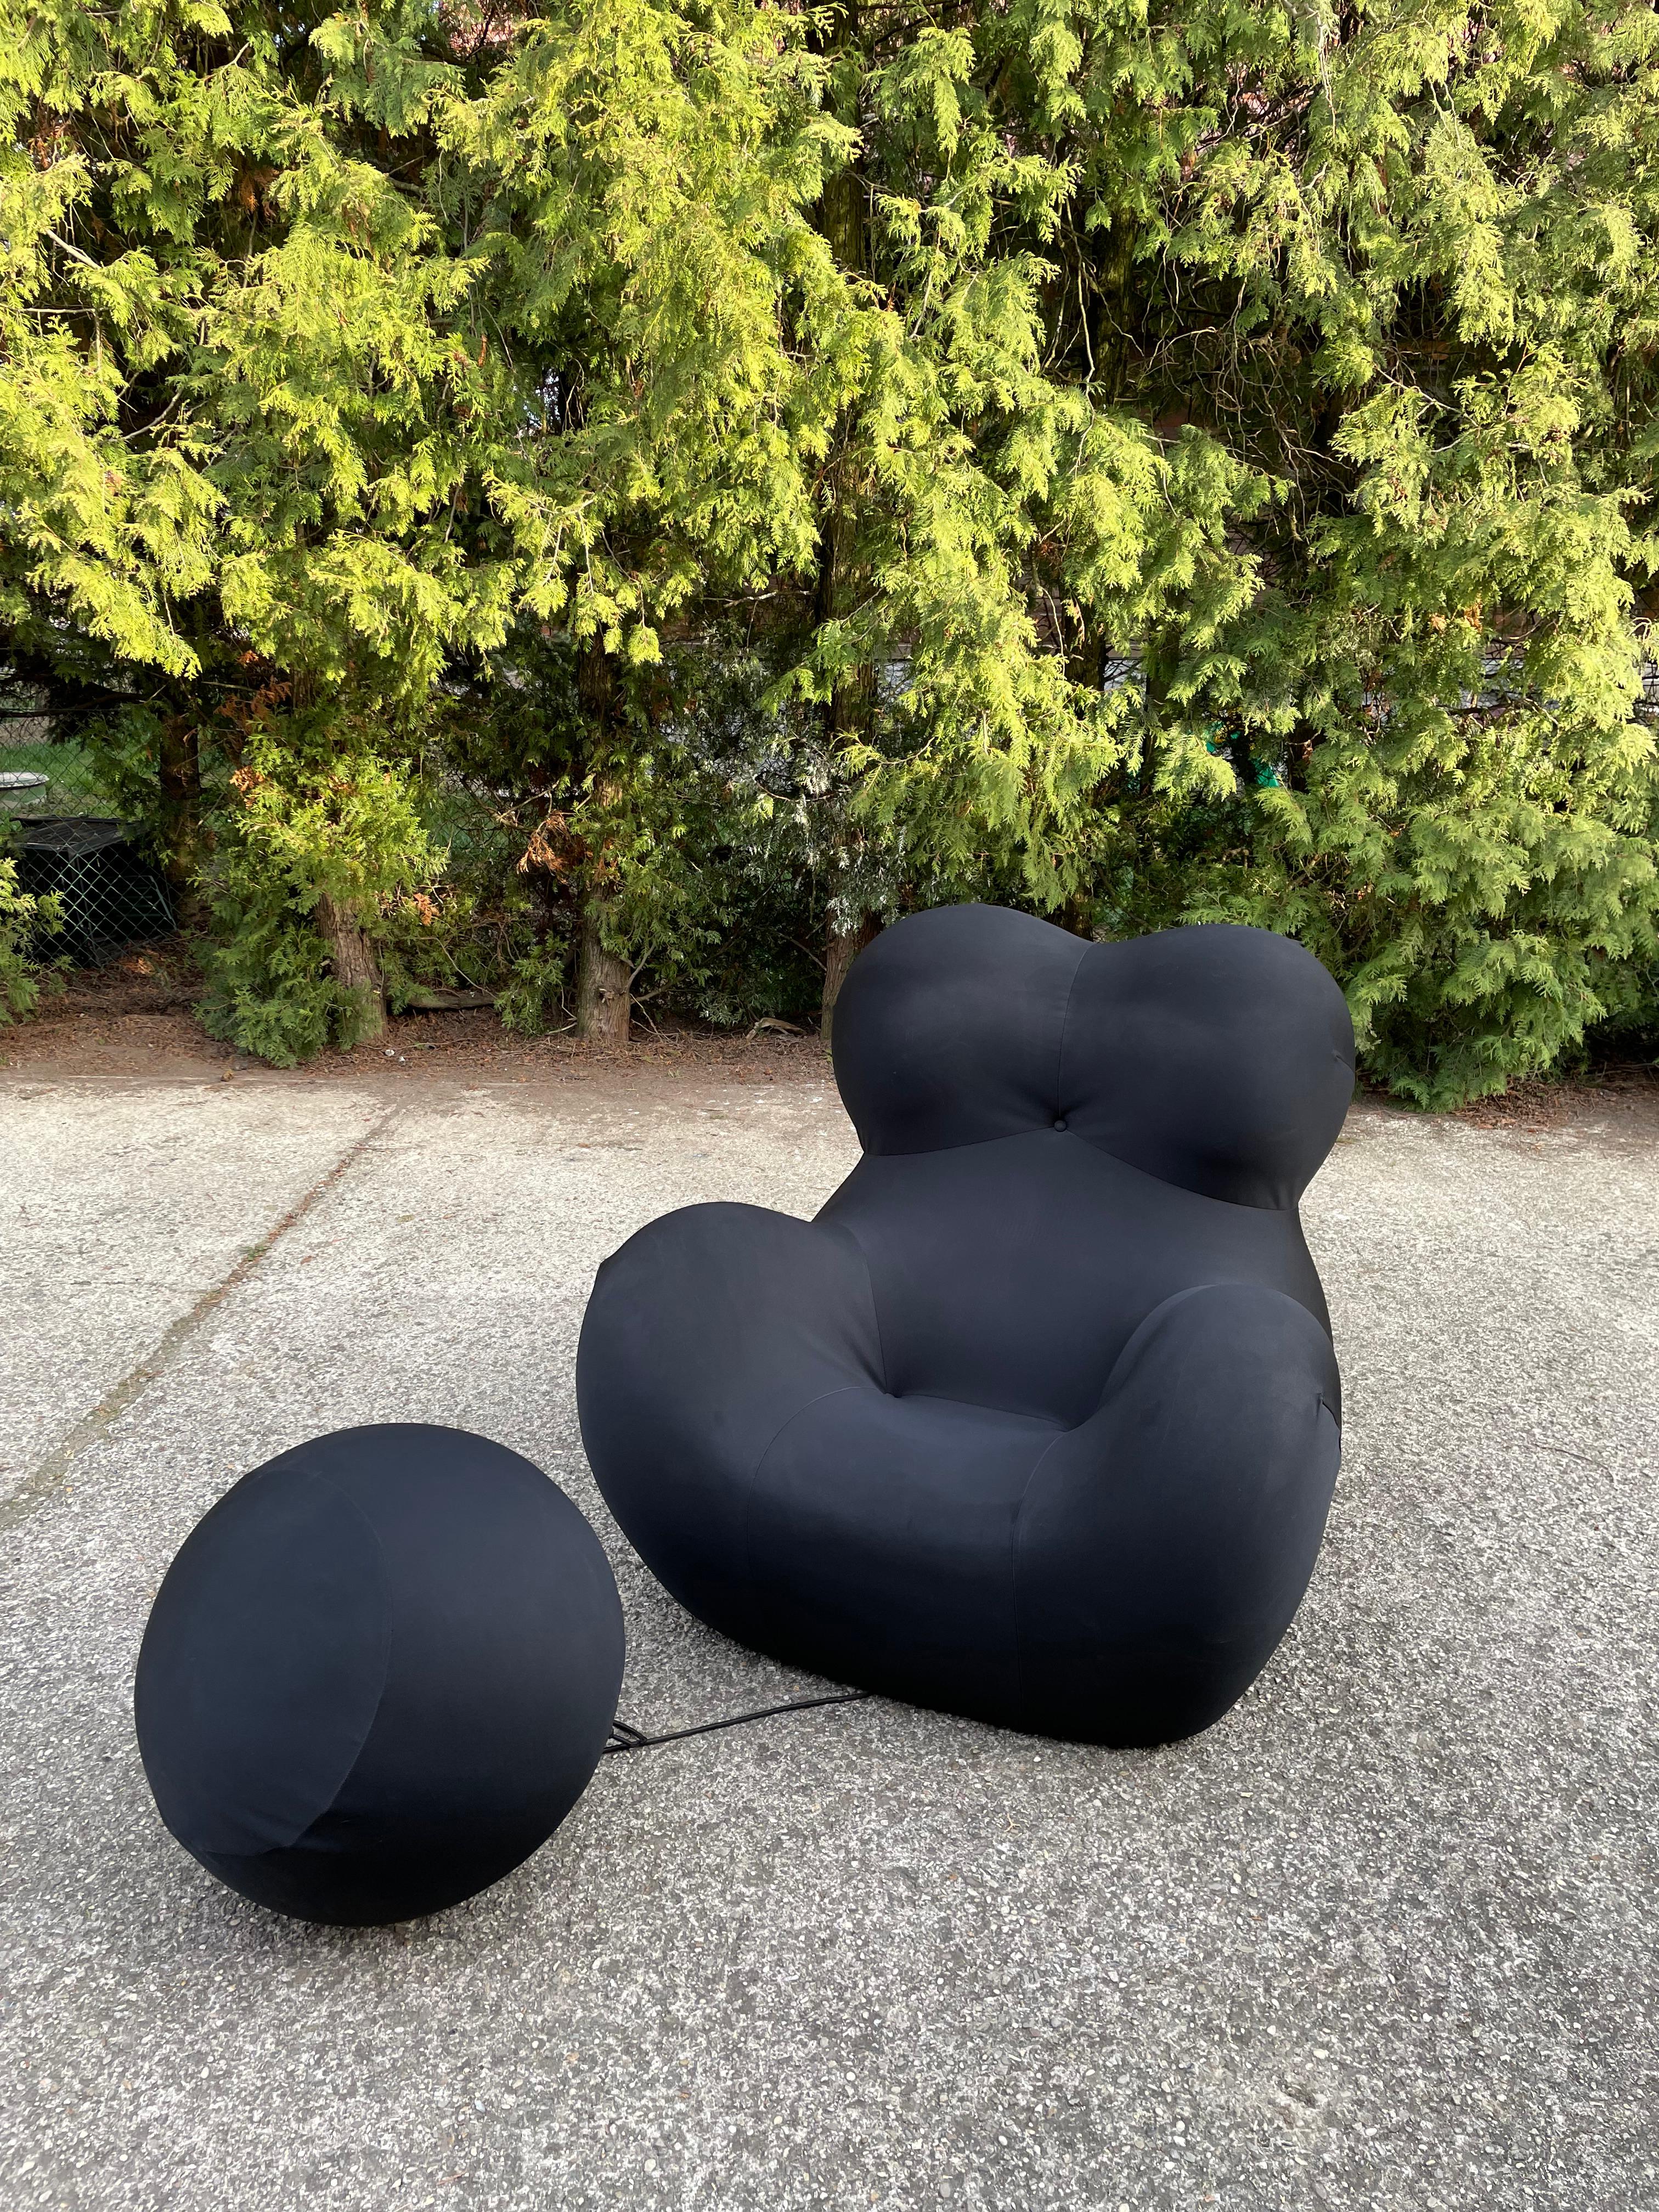 La Mamma Up5 and Up6 Armchair from the Up 2000 series by B & B Italia.

Designed in 1969 by famous Italian designer Gaetano Pesce.
Since its first appearance, the UP series, designed in 1969, has been one of the most outstanding expressions of